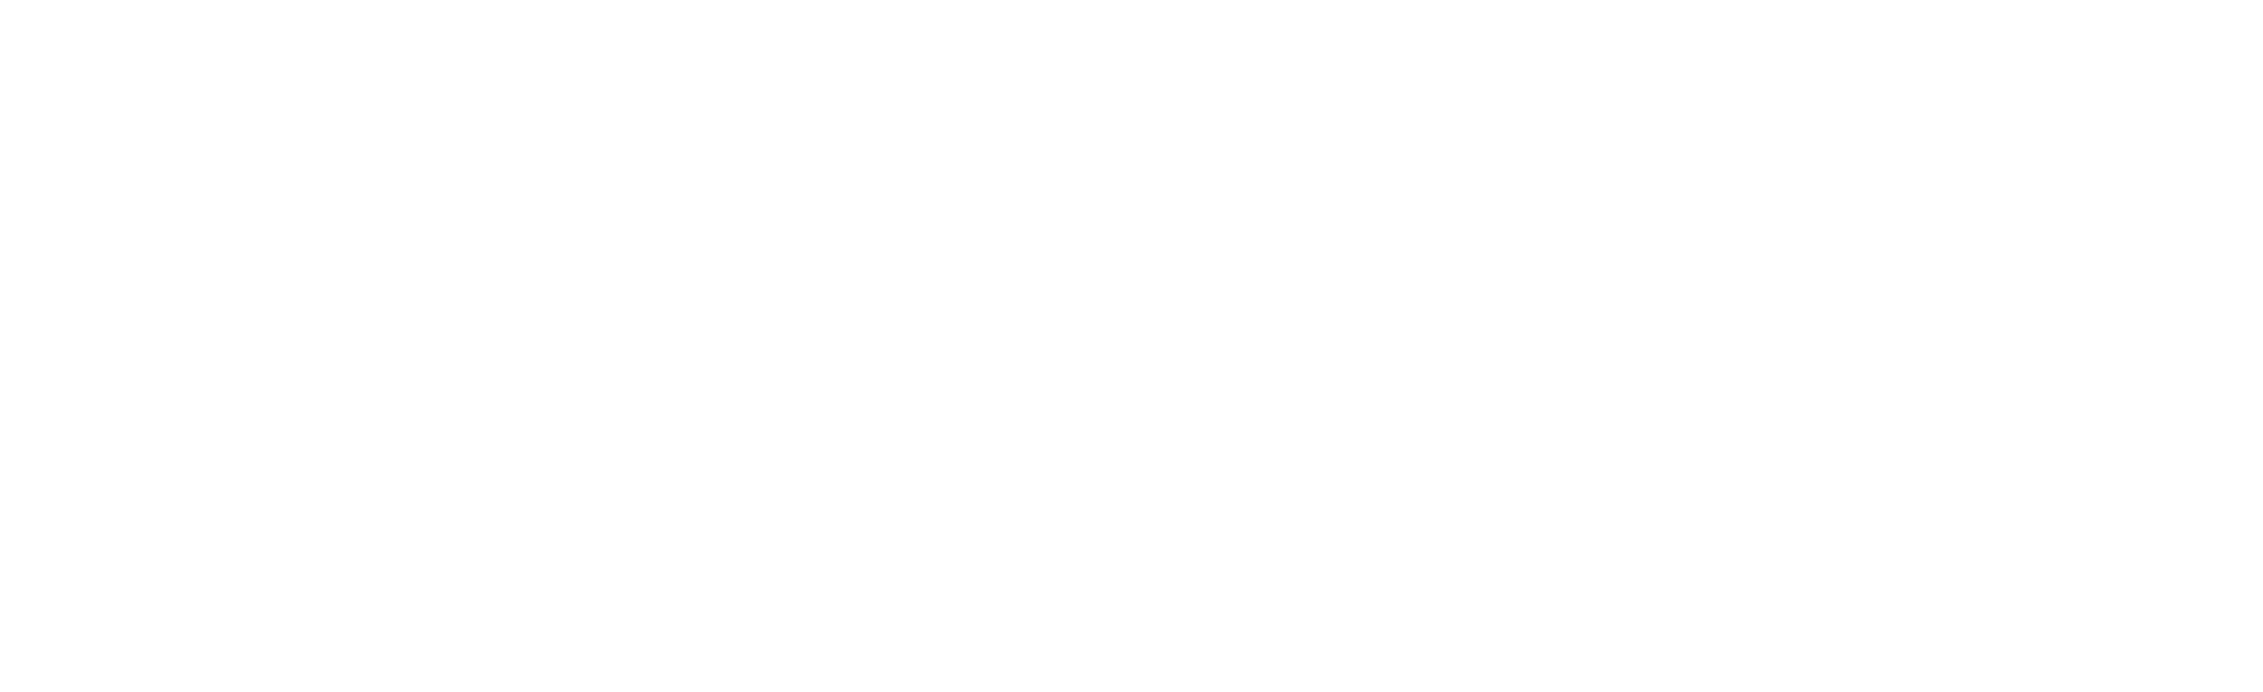 Professional Structural Engineer Logo - Meier Architecture